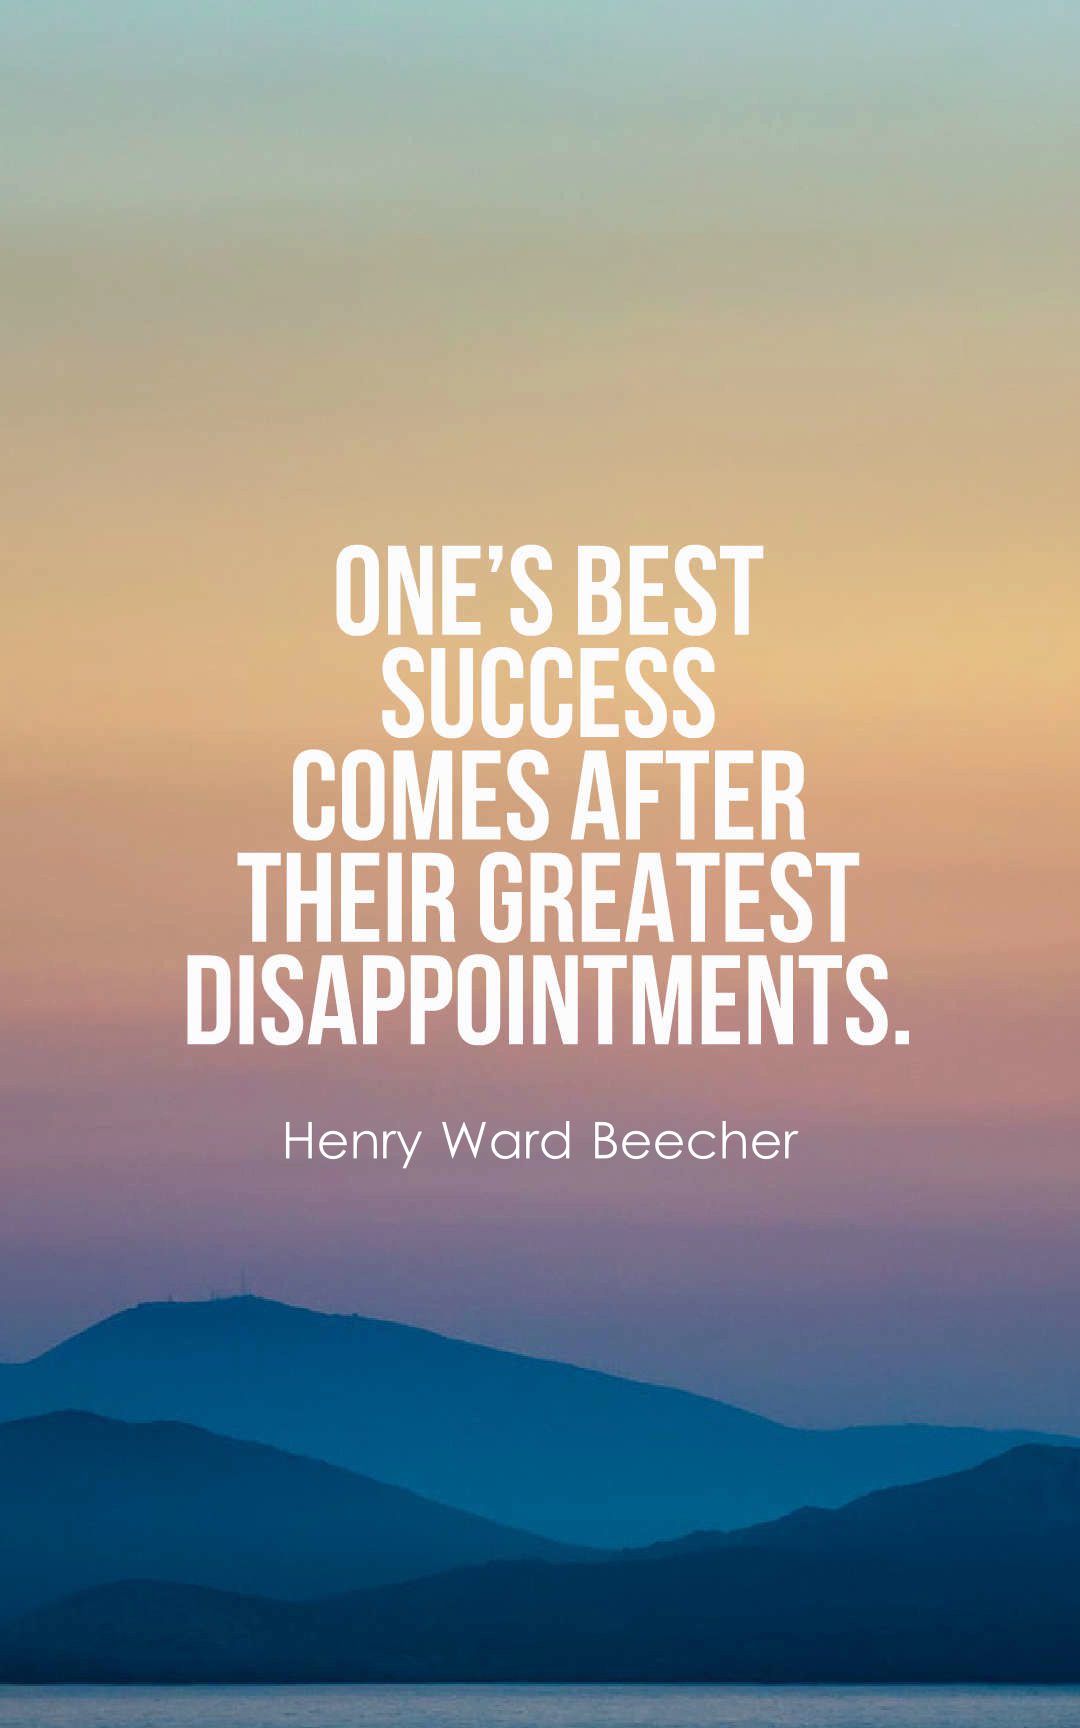 32 Inspirational Disappointment Quotes With Images